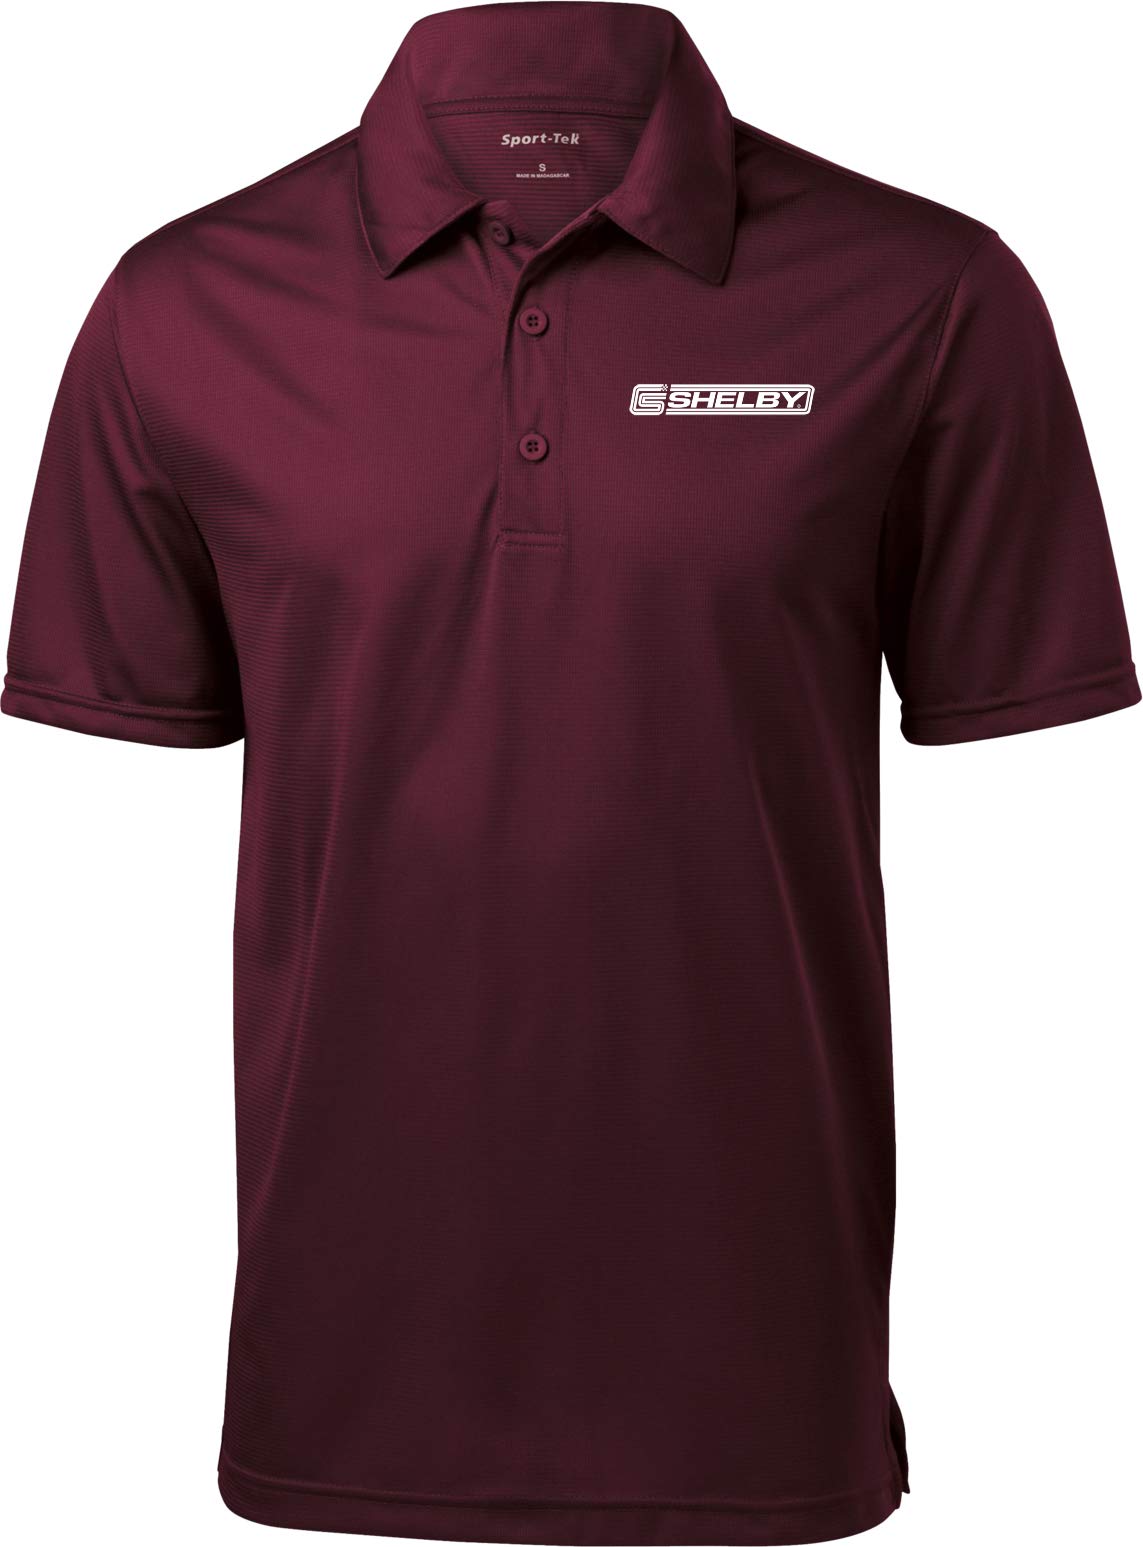 Ford Mustang Shelby Crest Pocket Print Textured Polo, Maroon XL